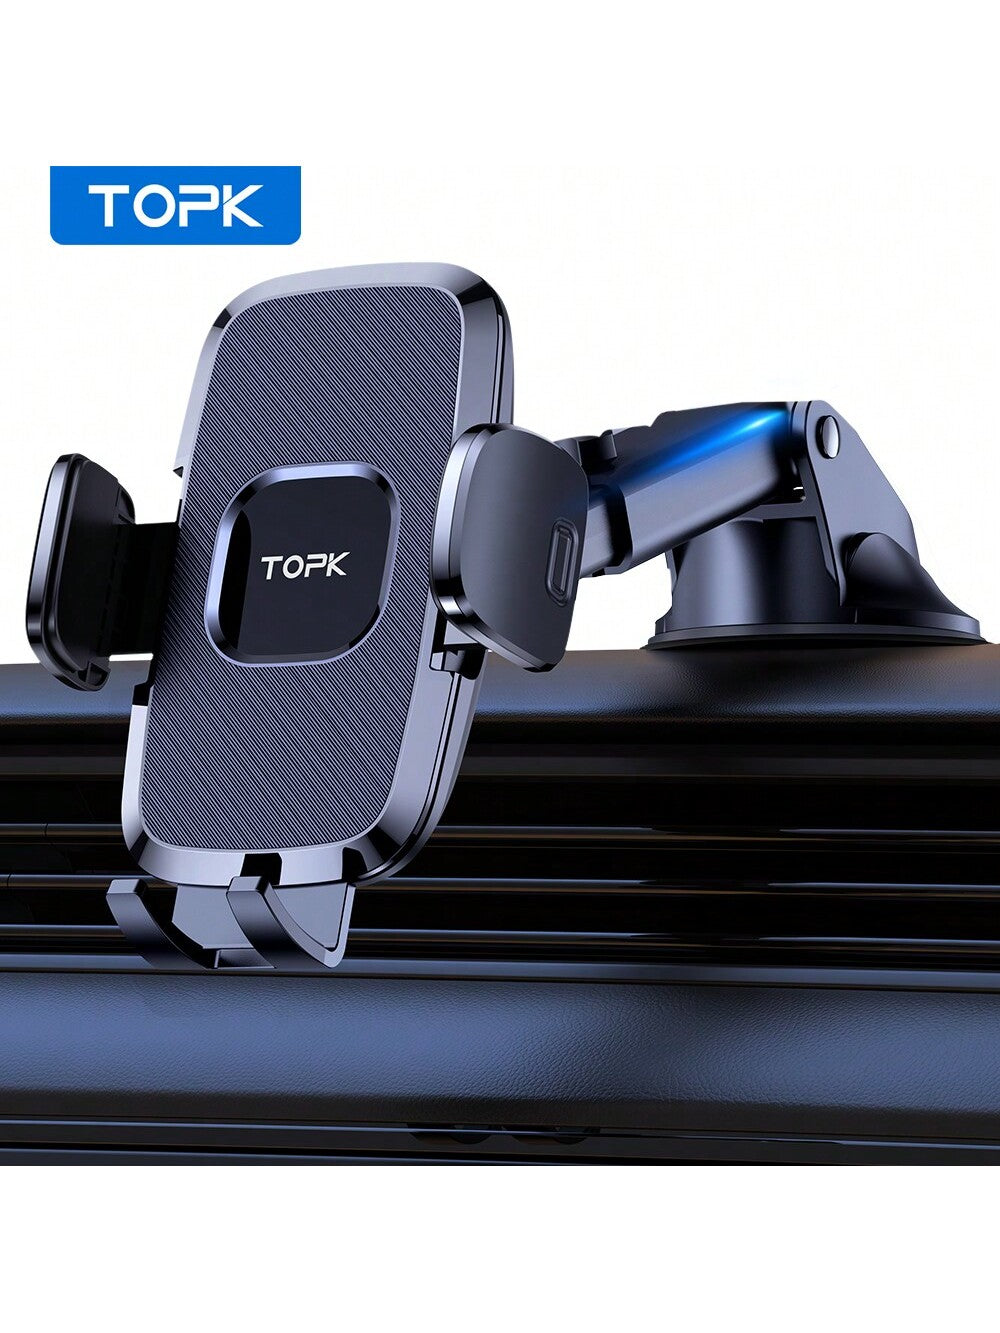 TOPK Car Phone Holder Mount, Upgraded Adjustable Horizontally And Vertically Cell Phone Holder For Car Dashboard